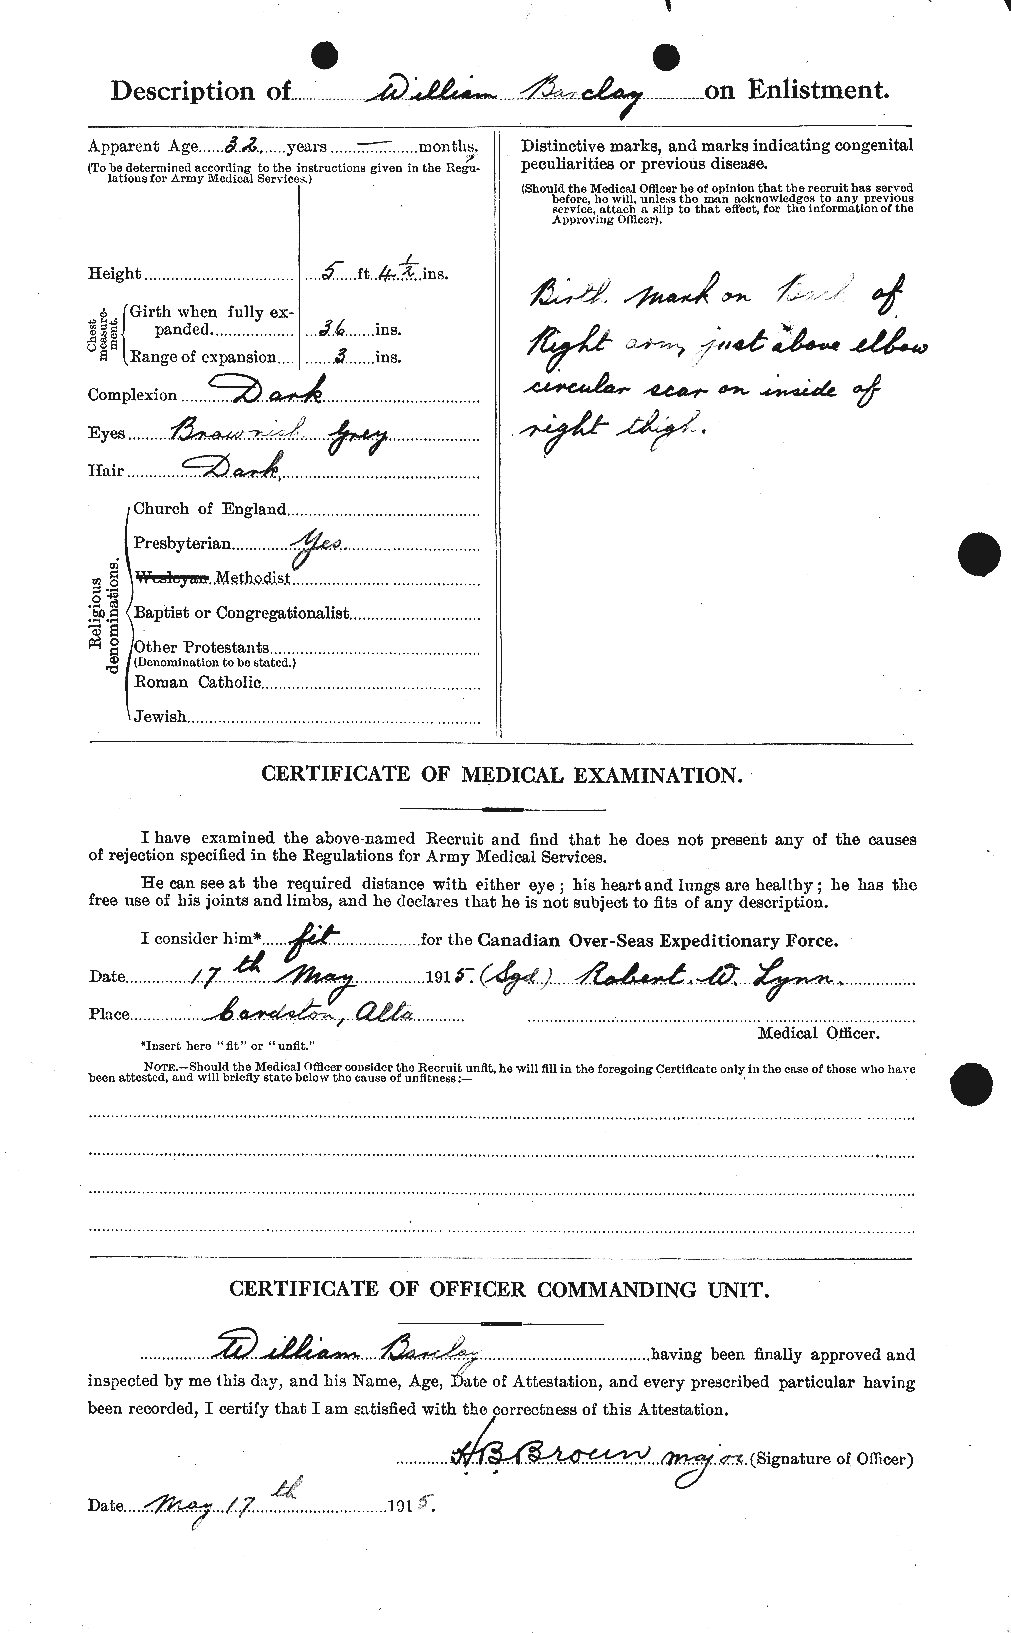 Personnel Records of the First World War - CEF 220853b